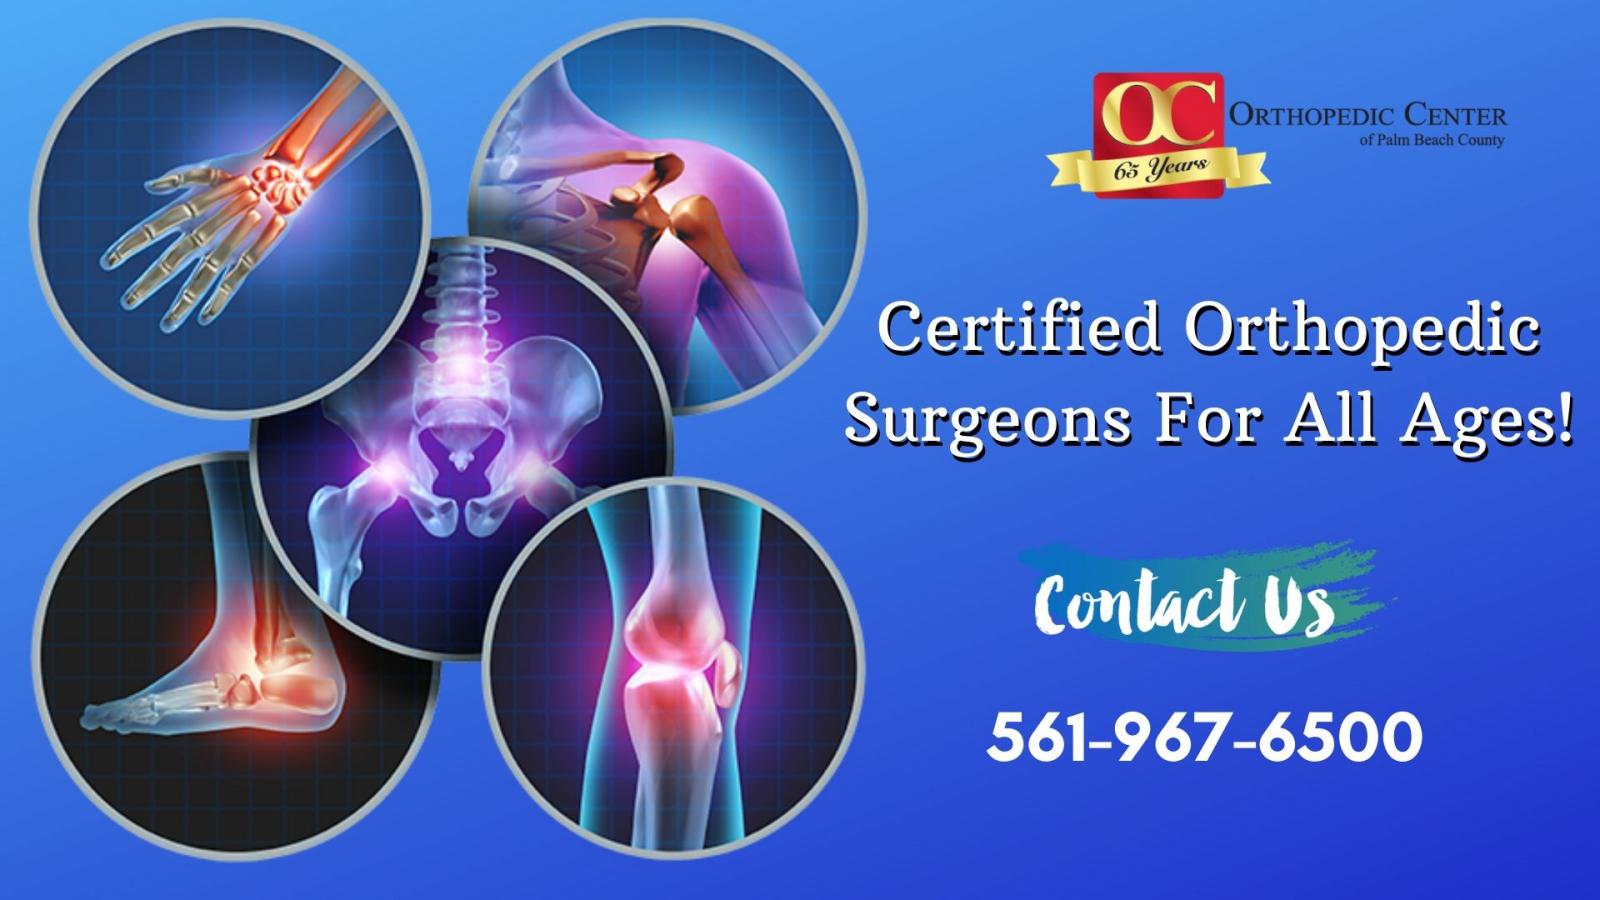 Premiere Care For Orthopedic Treatment